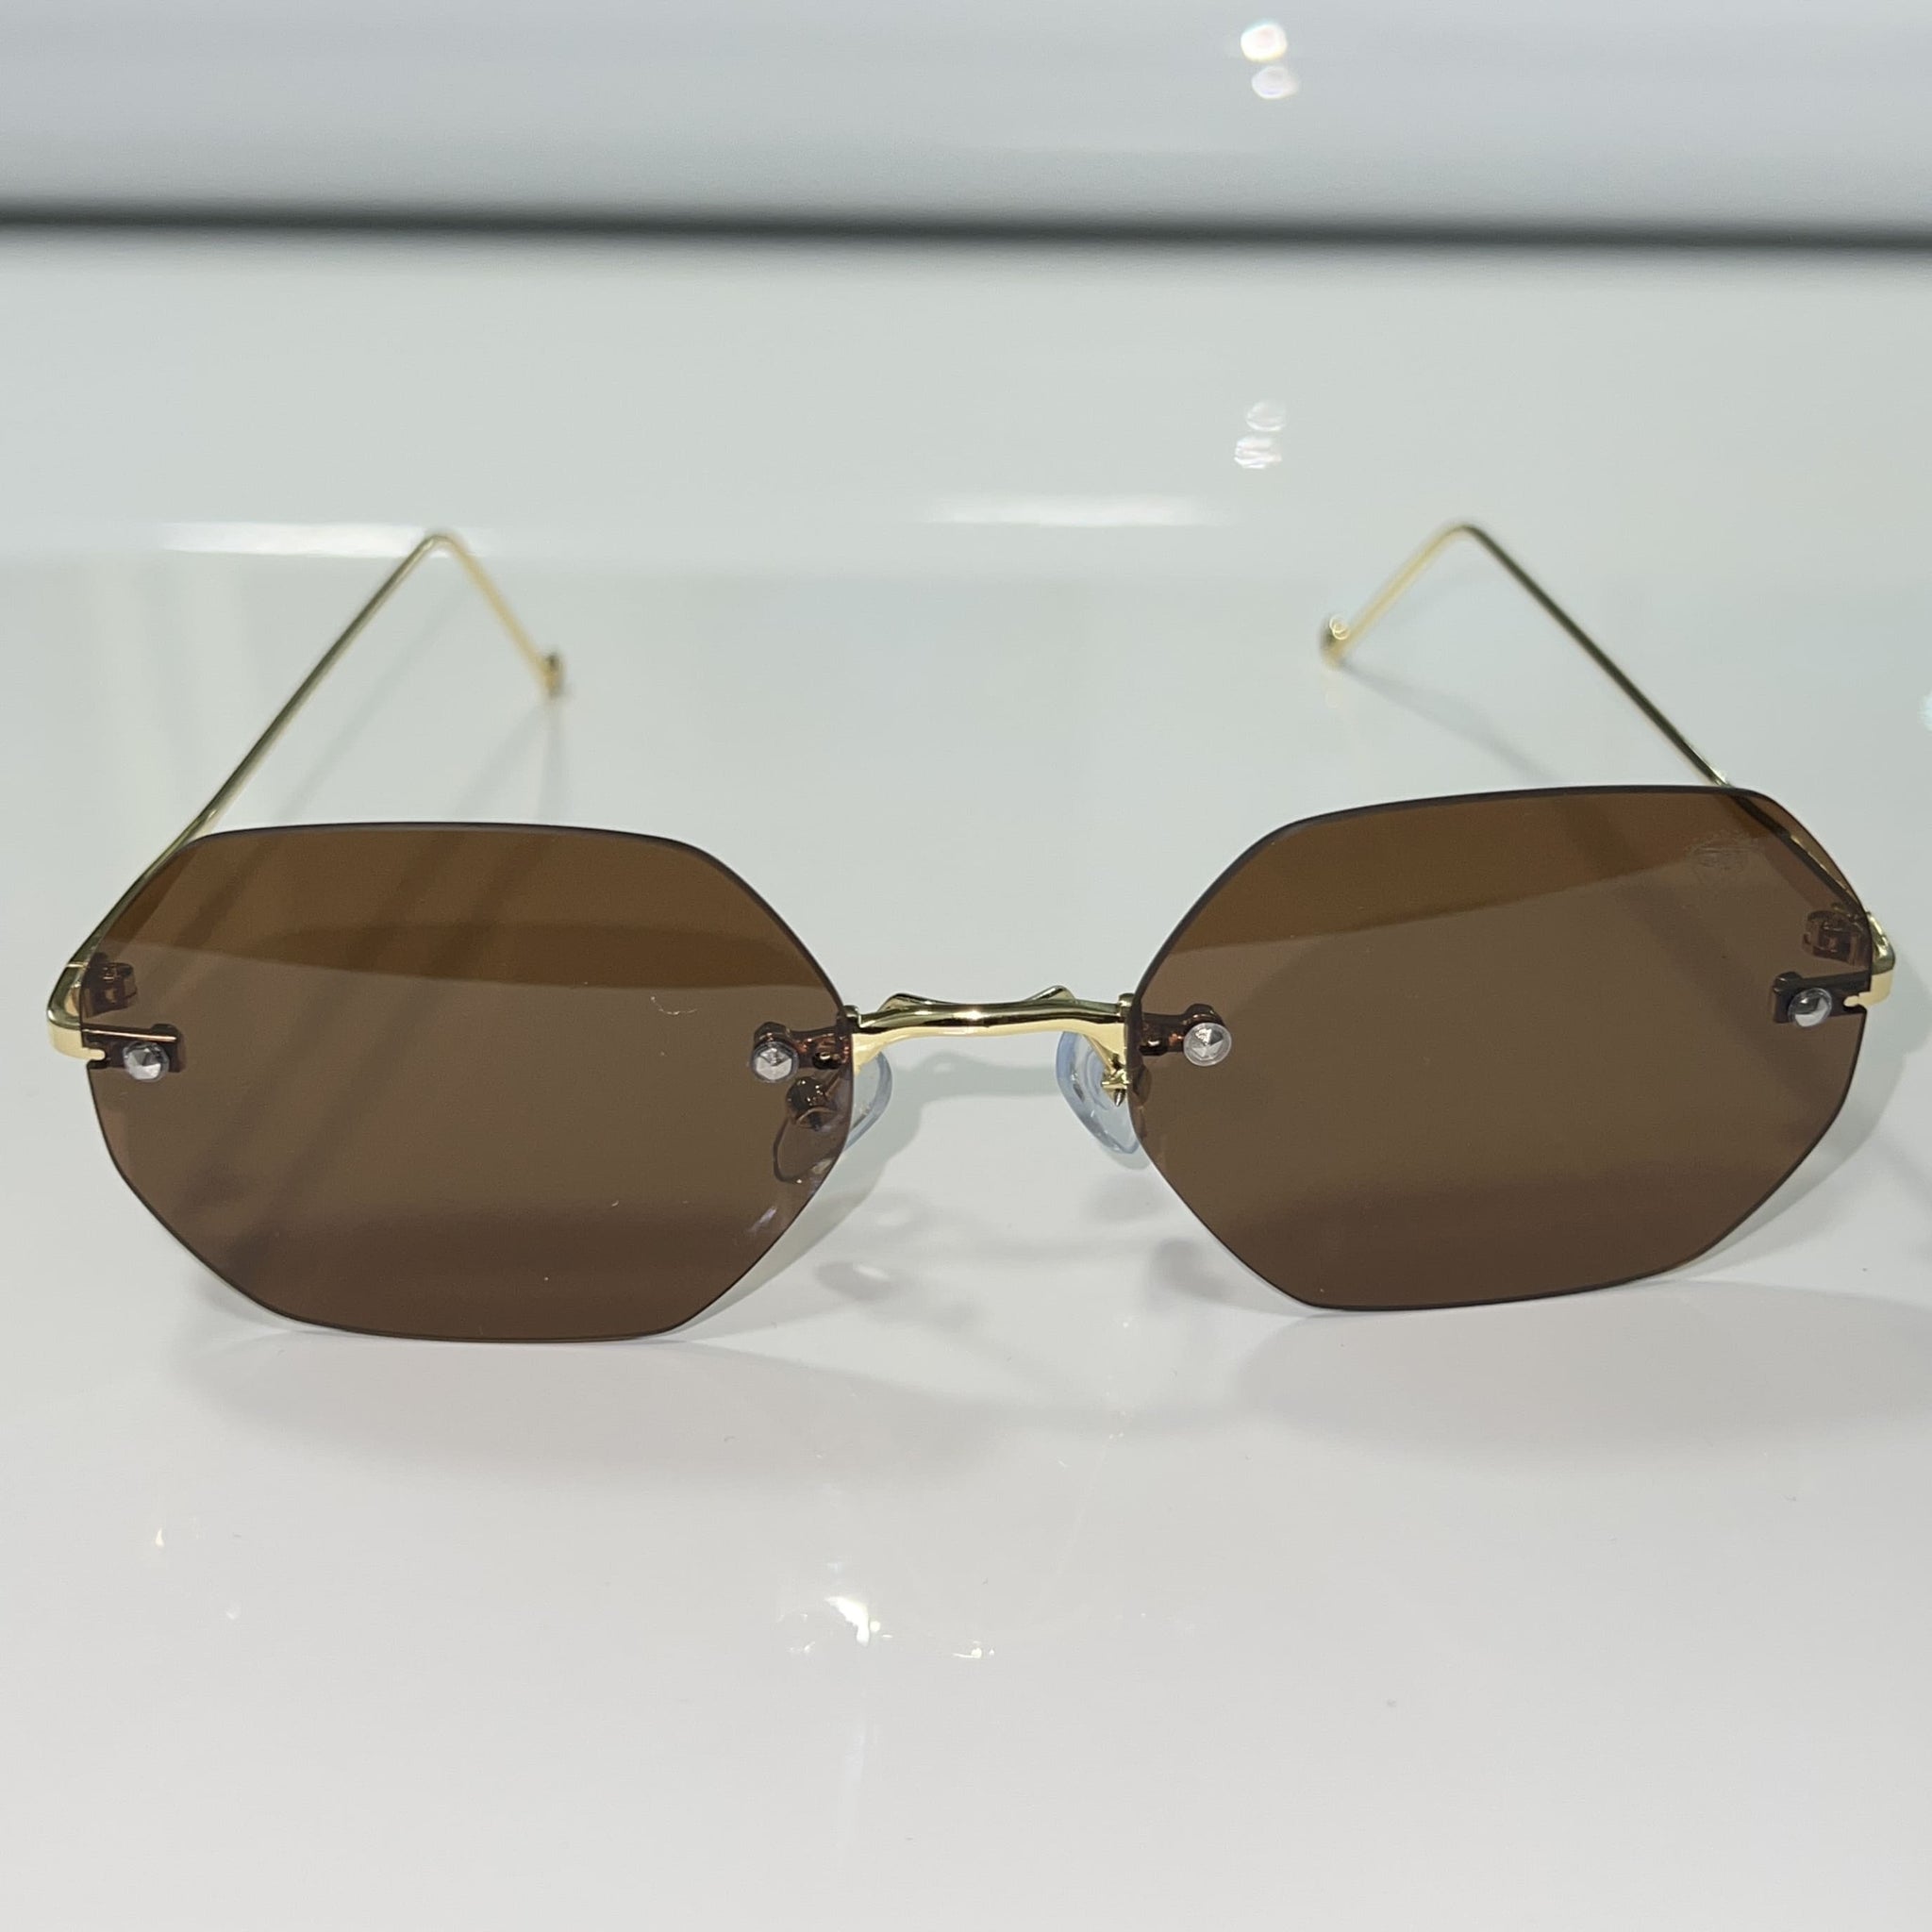 Star Glasses - Sehgal Glasses - 14k gold plated - Brown Shade